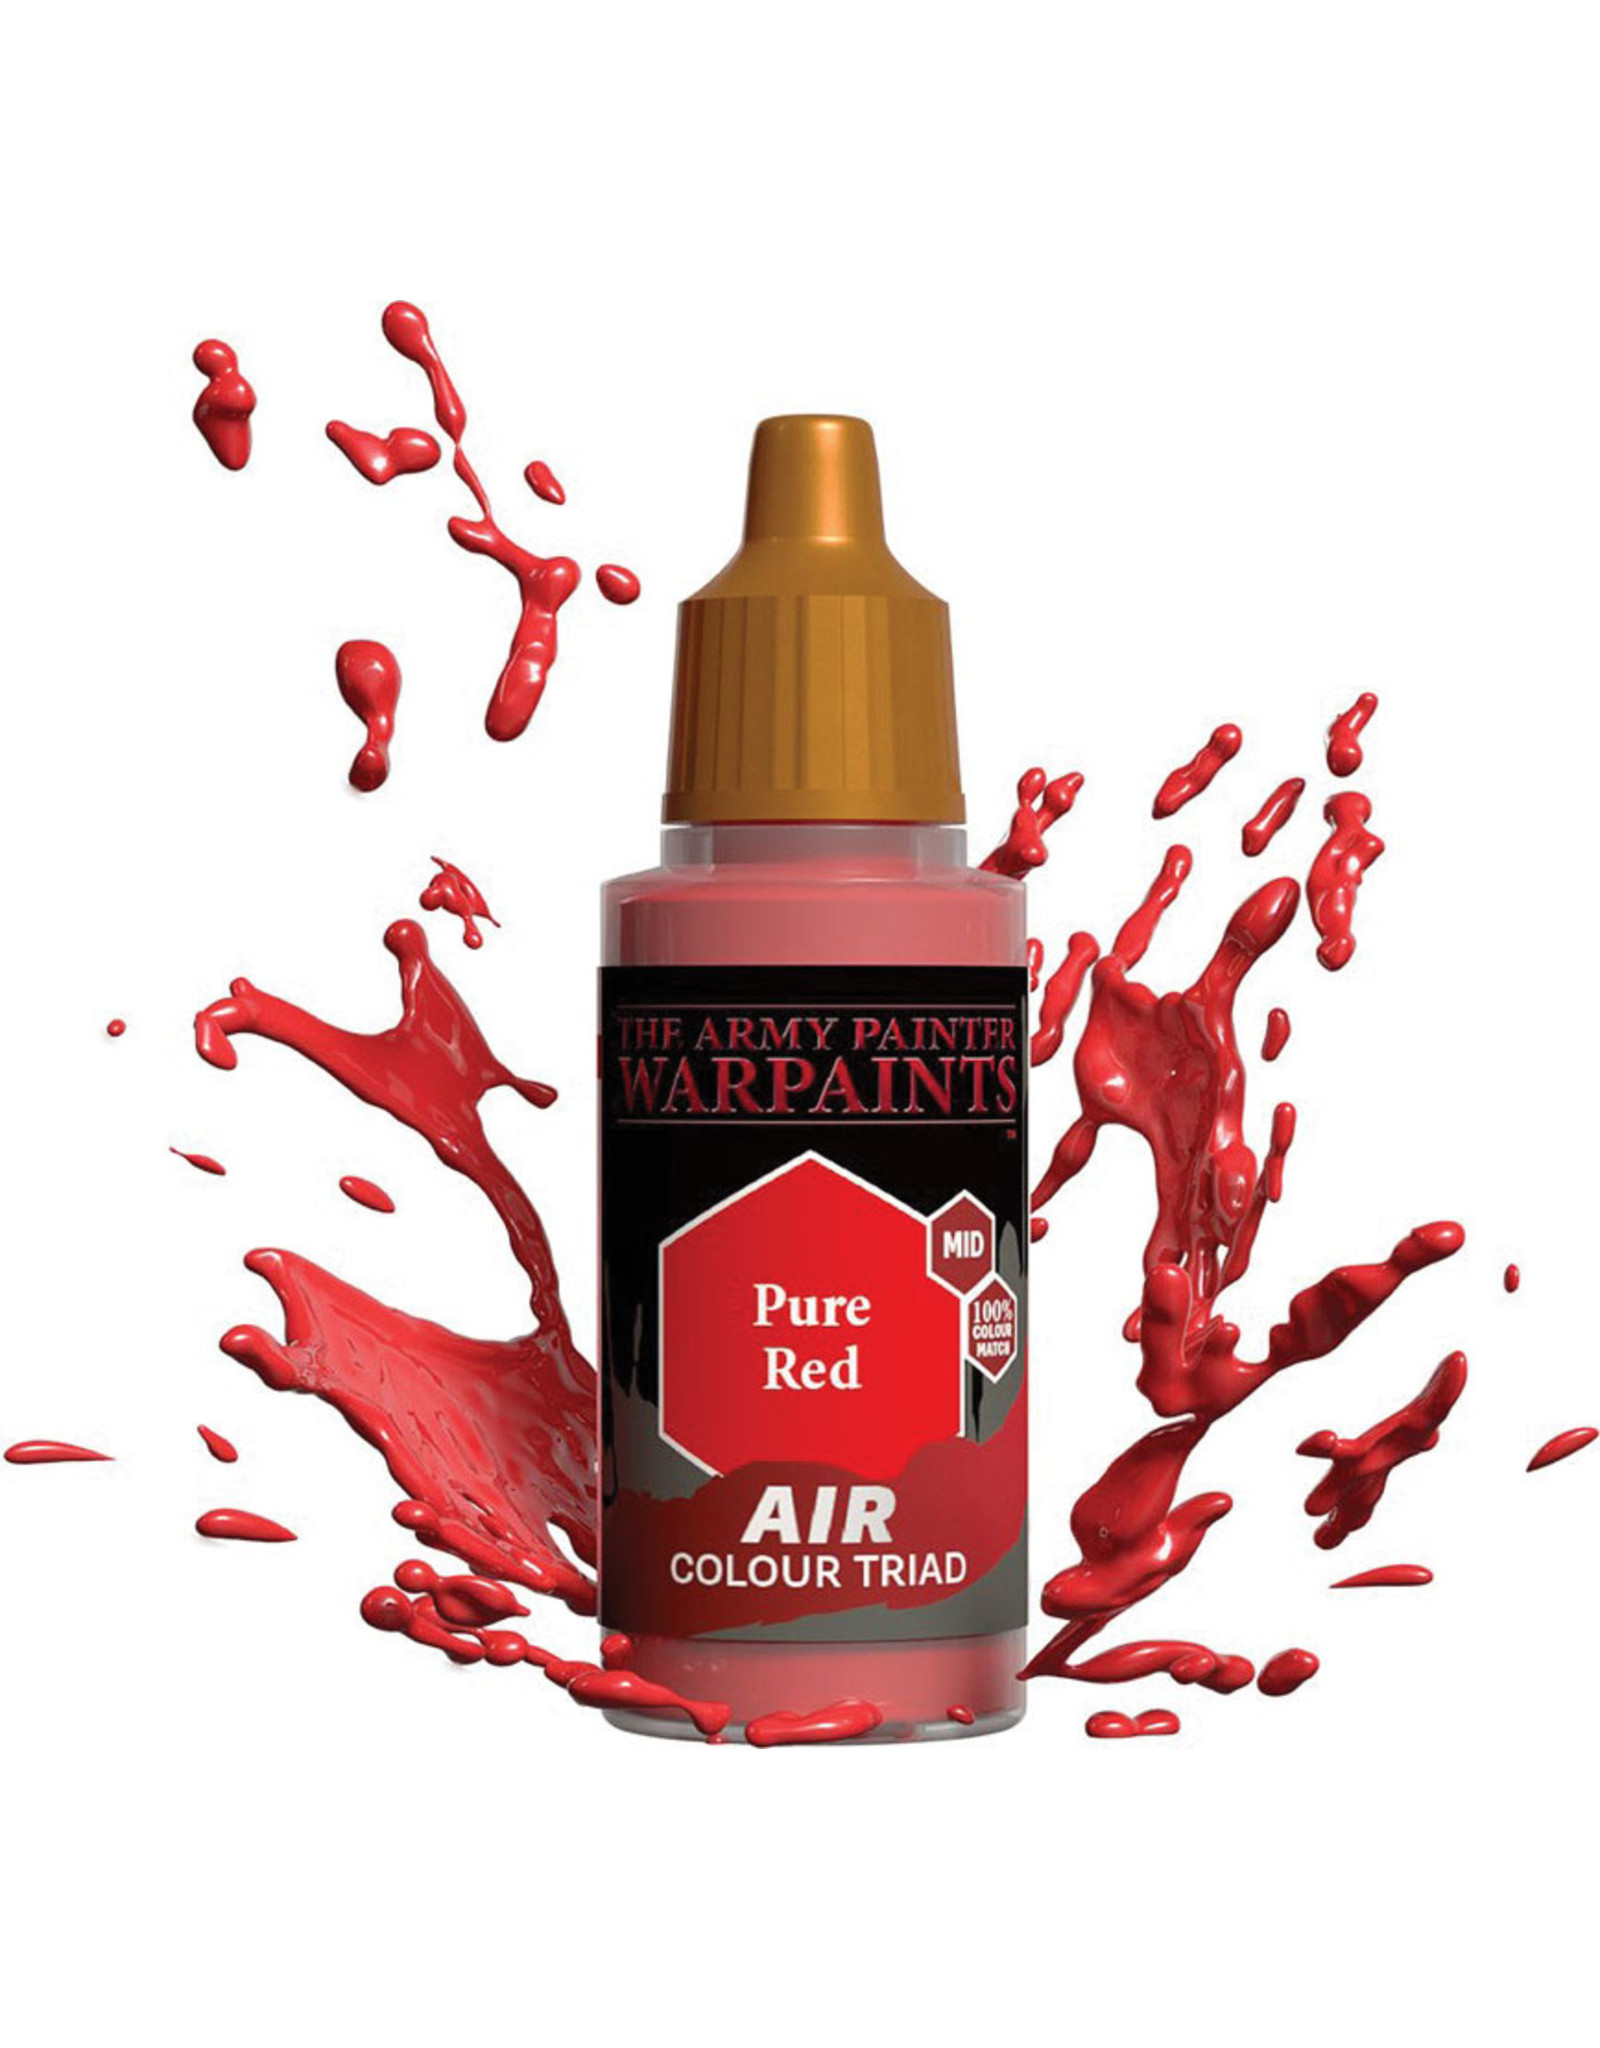 Army Painter Warpaint Air: Pure Red, 18ml.